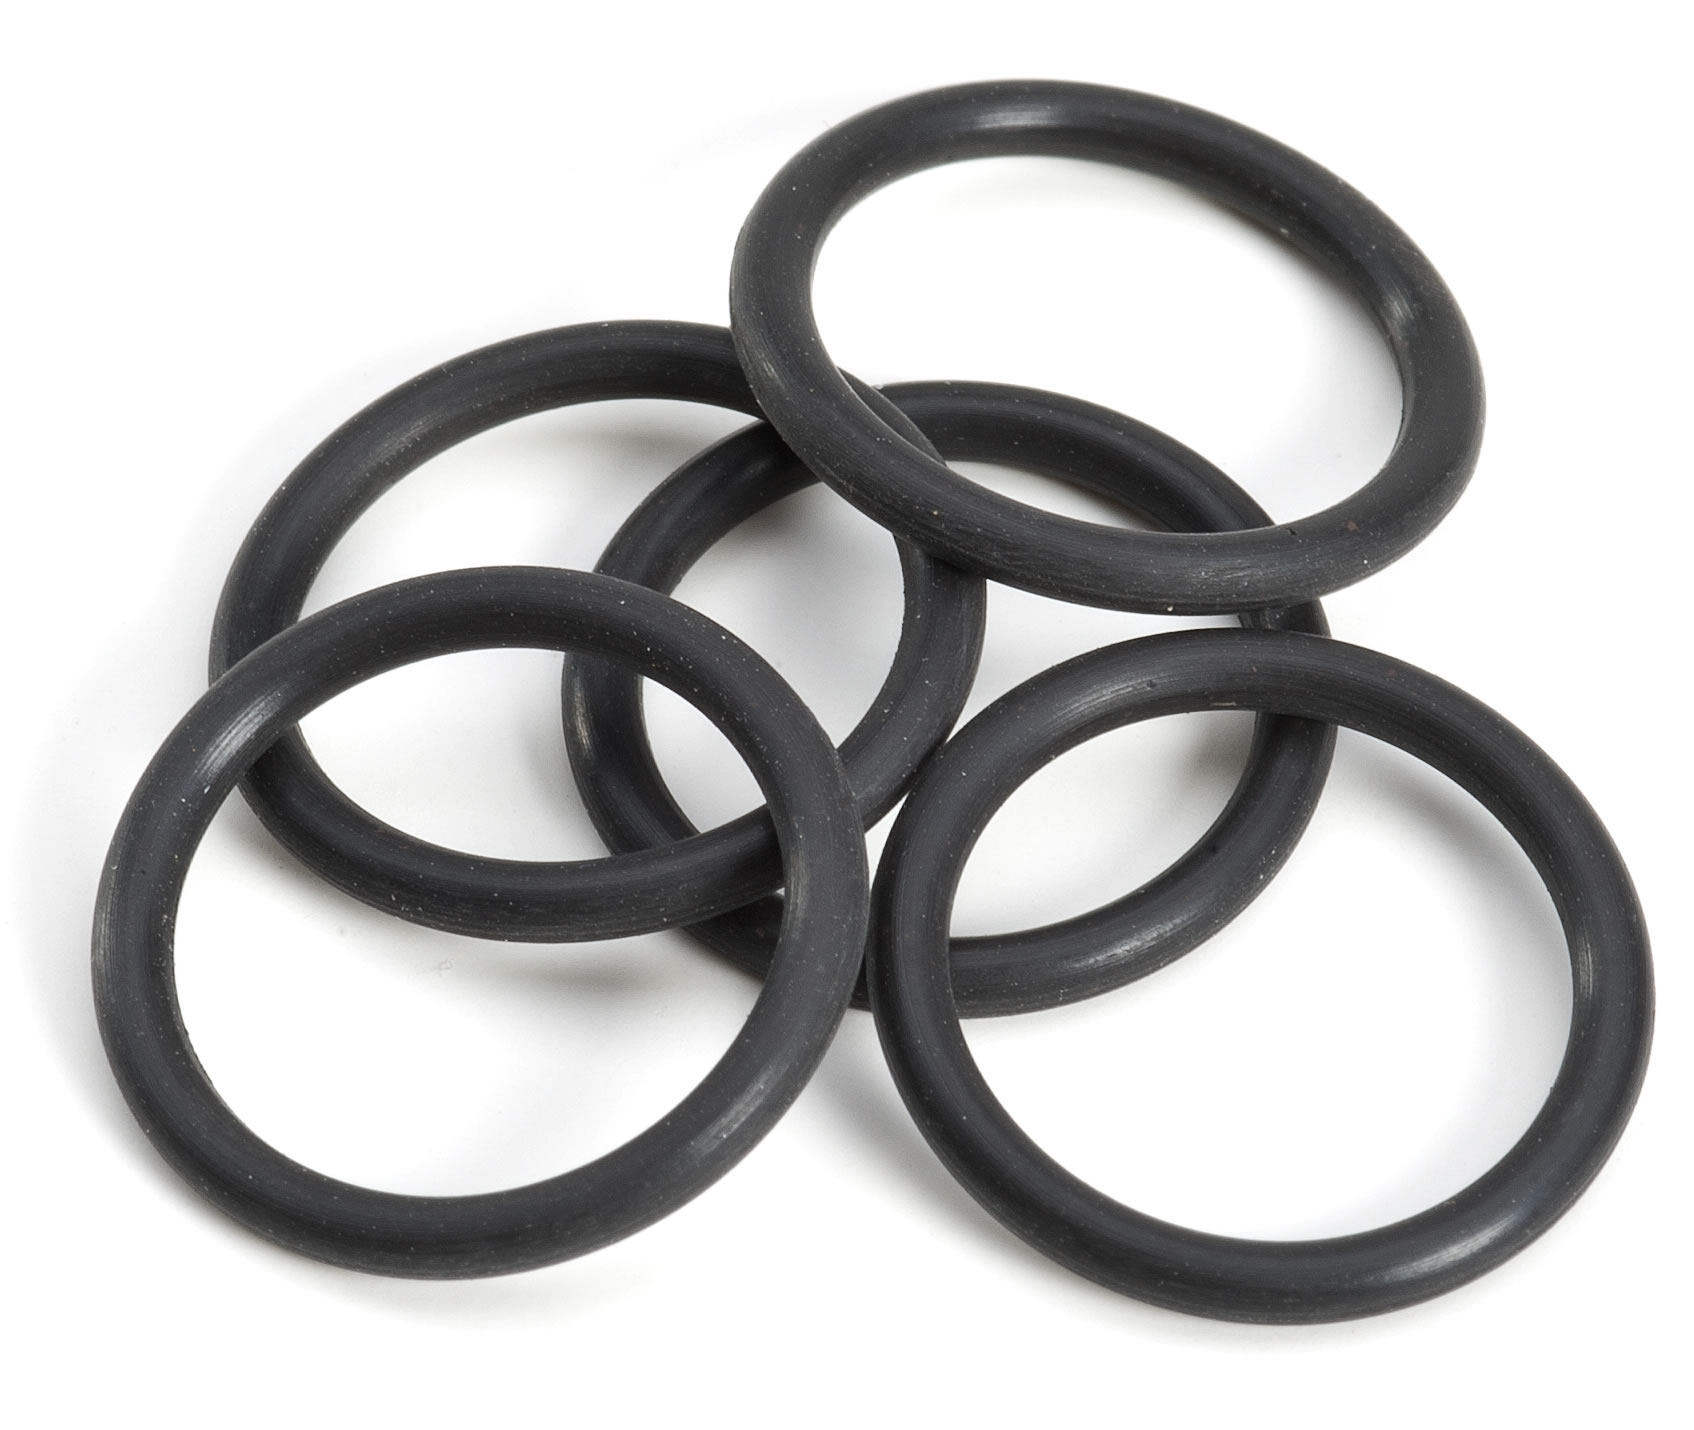 PROSEALS provides o-rings and engineered sealing products, including PTFE,  rubber o-rings, metal o-rings, Precix, Trelleborg, Parco, metal seals, and  sealing products for critical applications and industrial customers such as  automotive, oil and